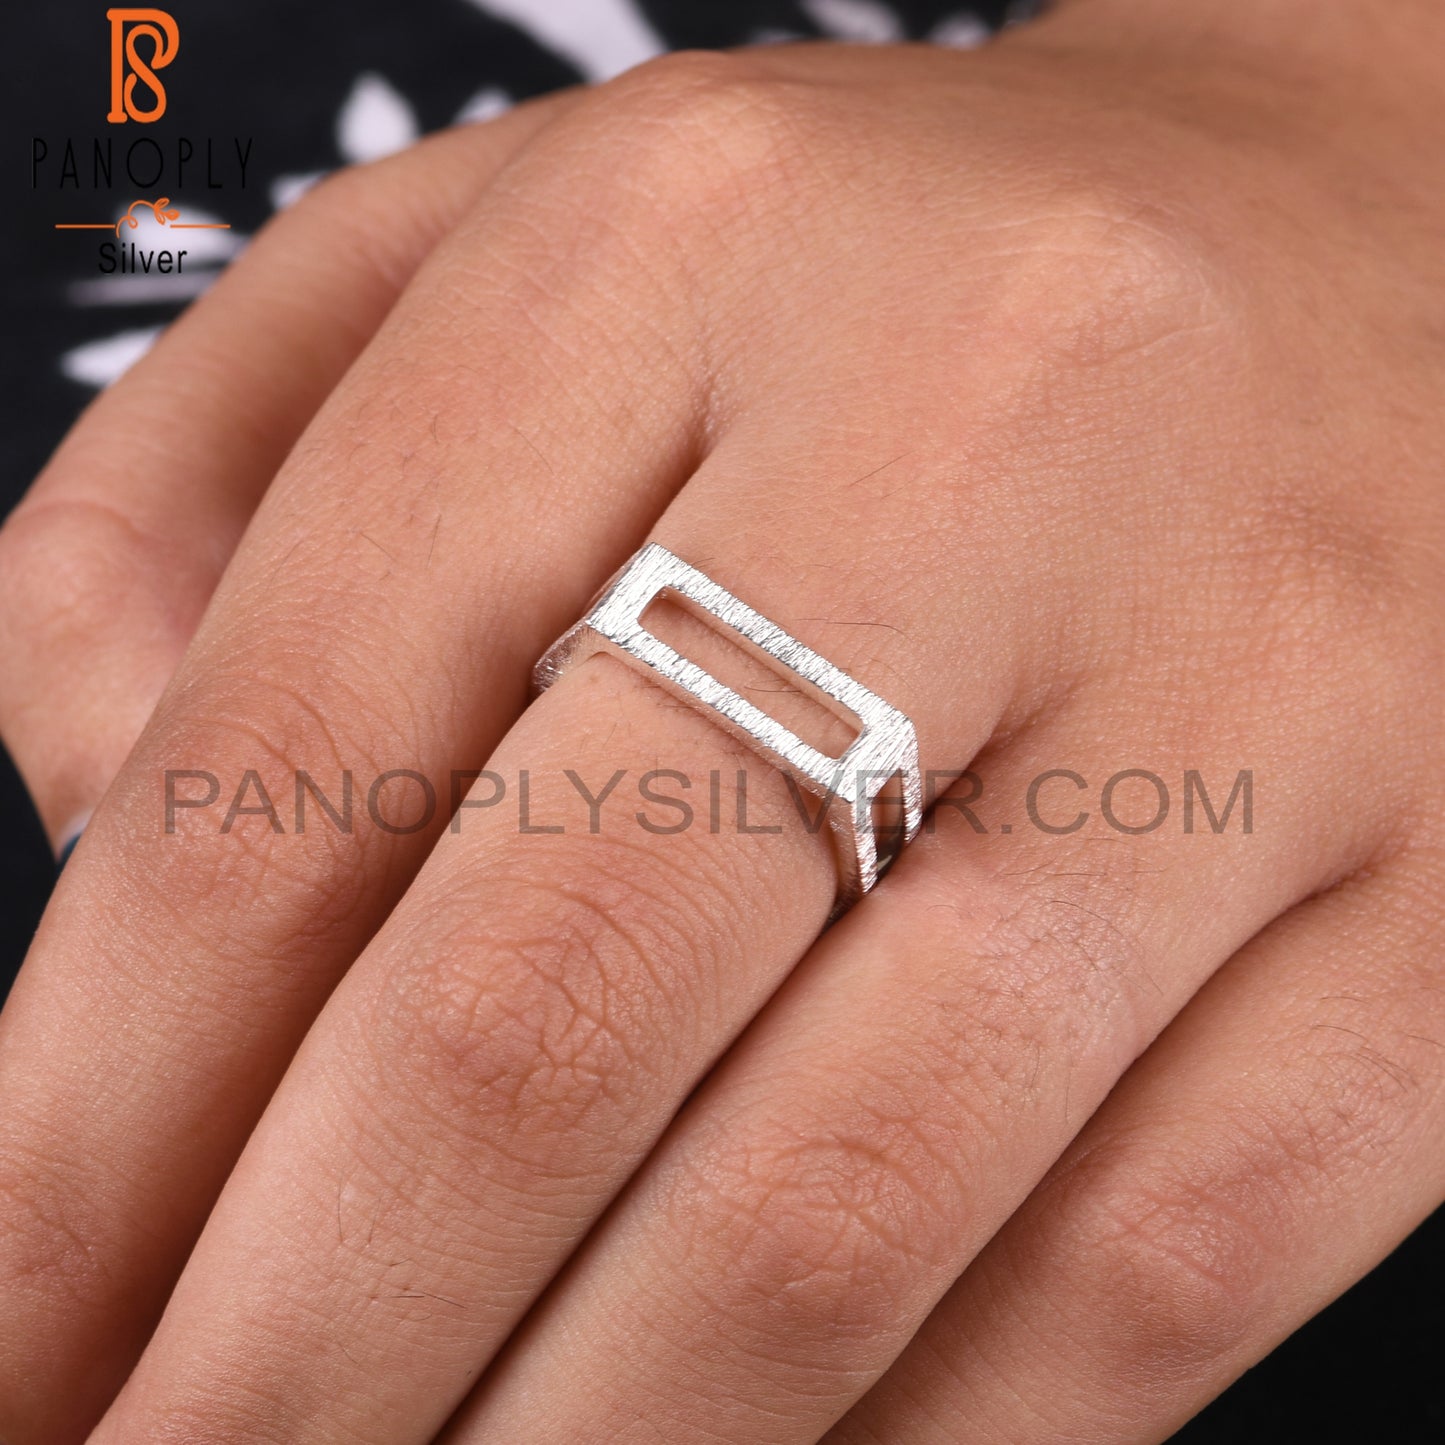 Handmade Quirky 925 Sterling Silver Ring